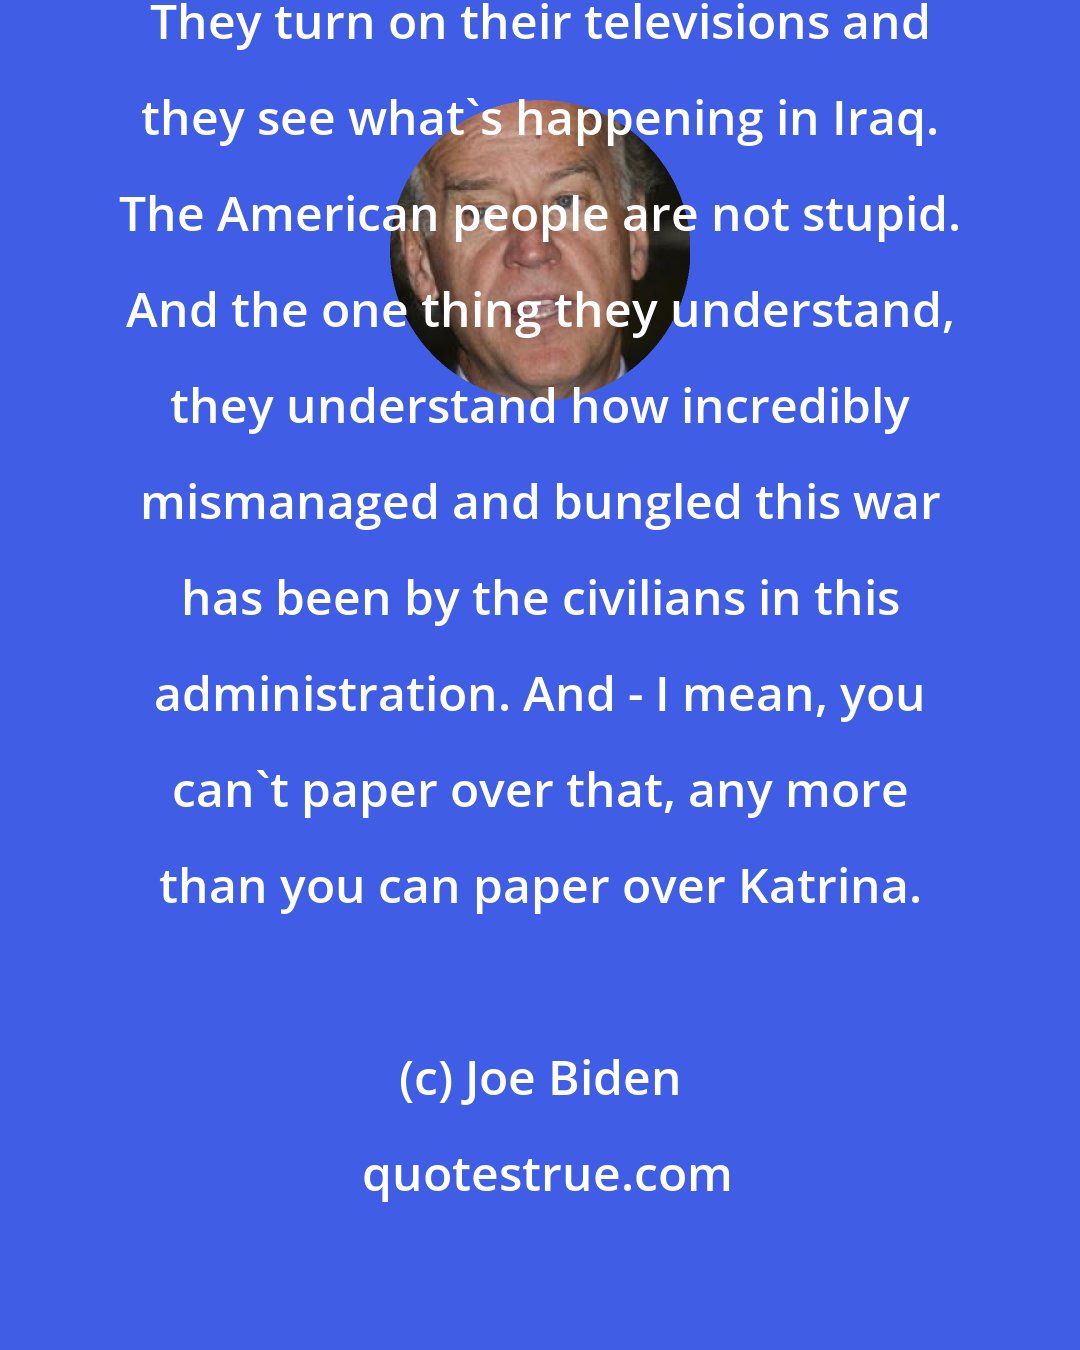 Joe Biden: But people turn on their televisions. They turn on their televisions and they see what's happening in Iraq. The American people are not stupid. And the one thing they understand, they understand how incredibly mismanaged and bungled this war has been by the civilians in this administration. And - I mean, you can't paper over that, any more than you can paper over Katrina.